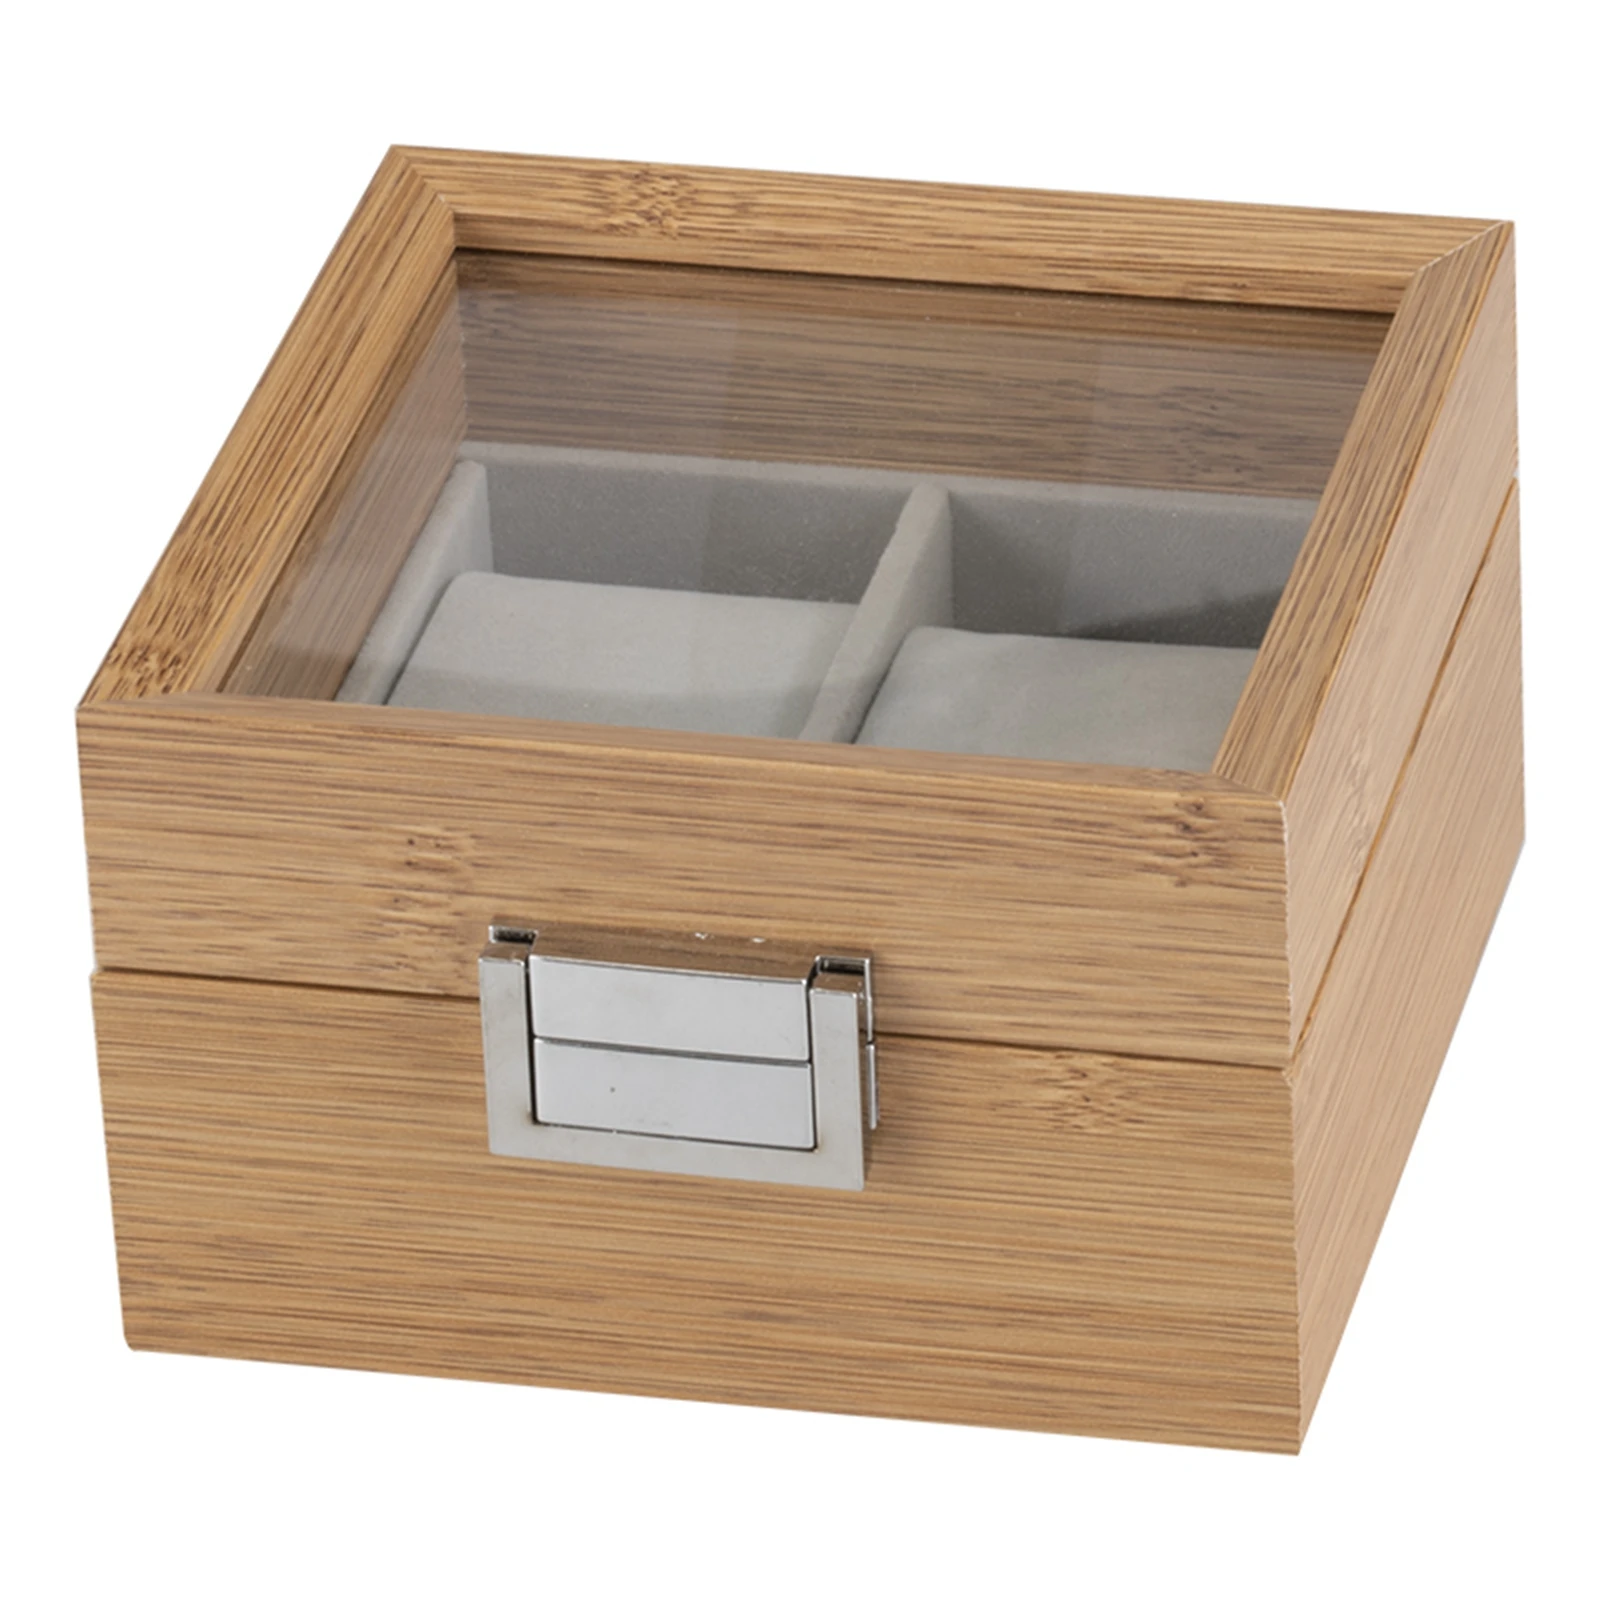 Wooden Watch Box Glass Top Vintage Soft Pillow Collection Organizer Gift Box for Men Women